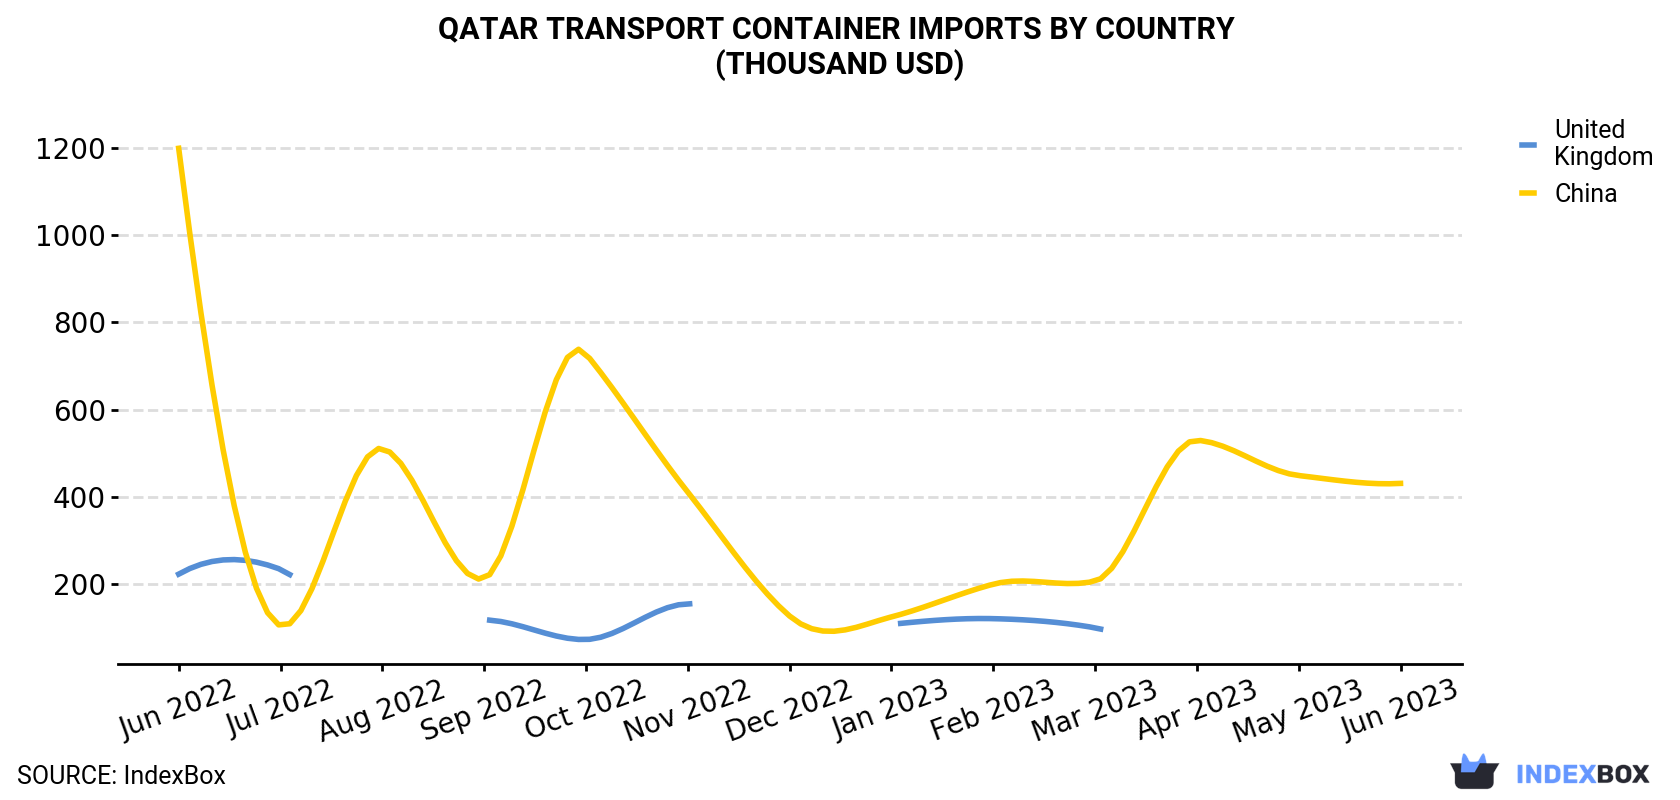 Qatar Transport Container Imports By Country (Thousand USD)